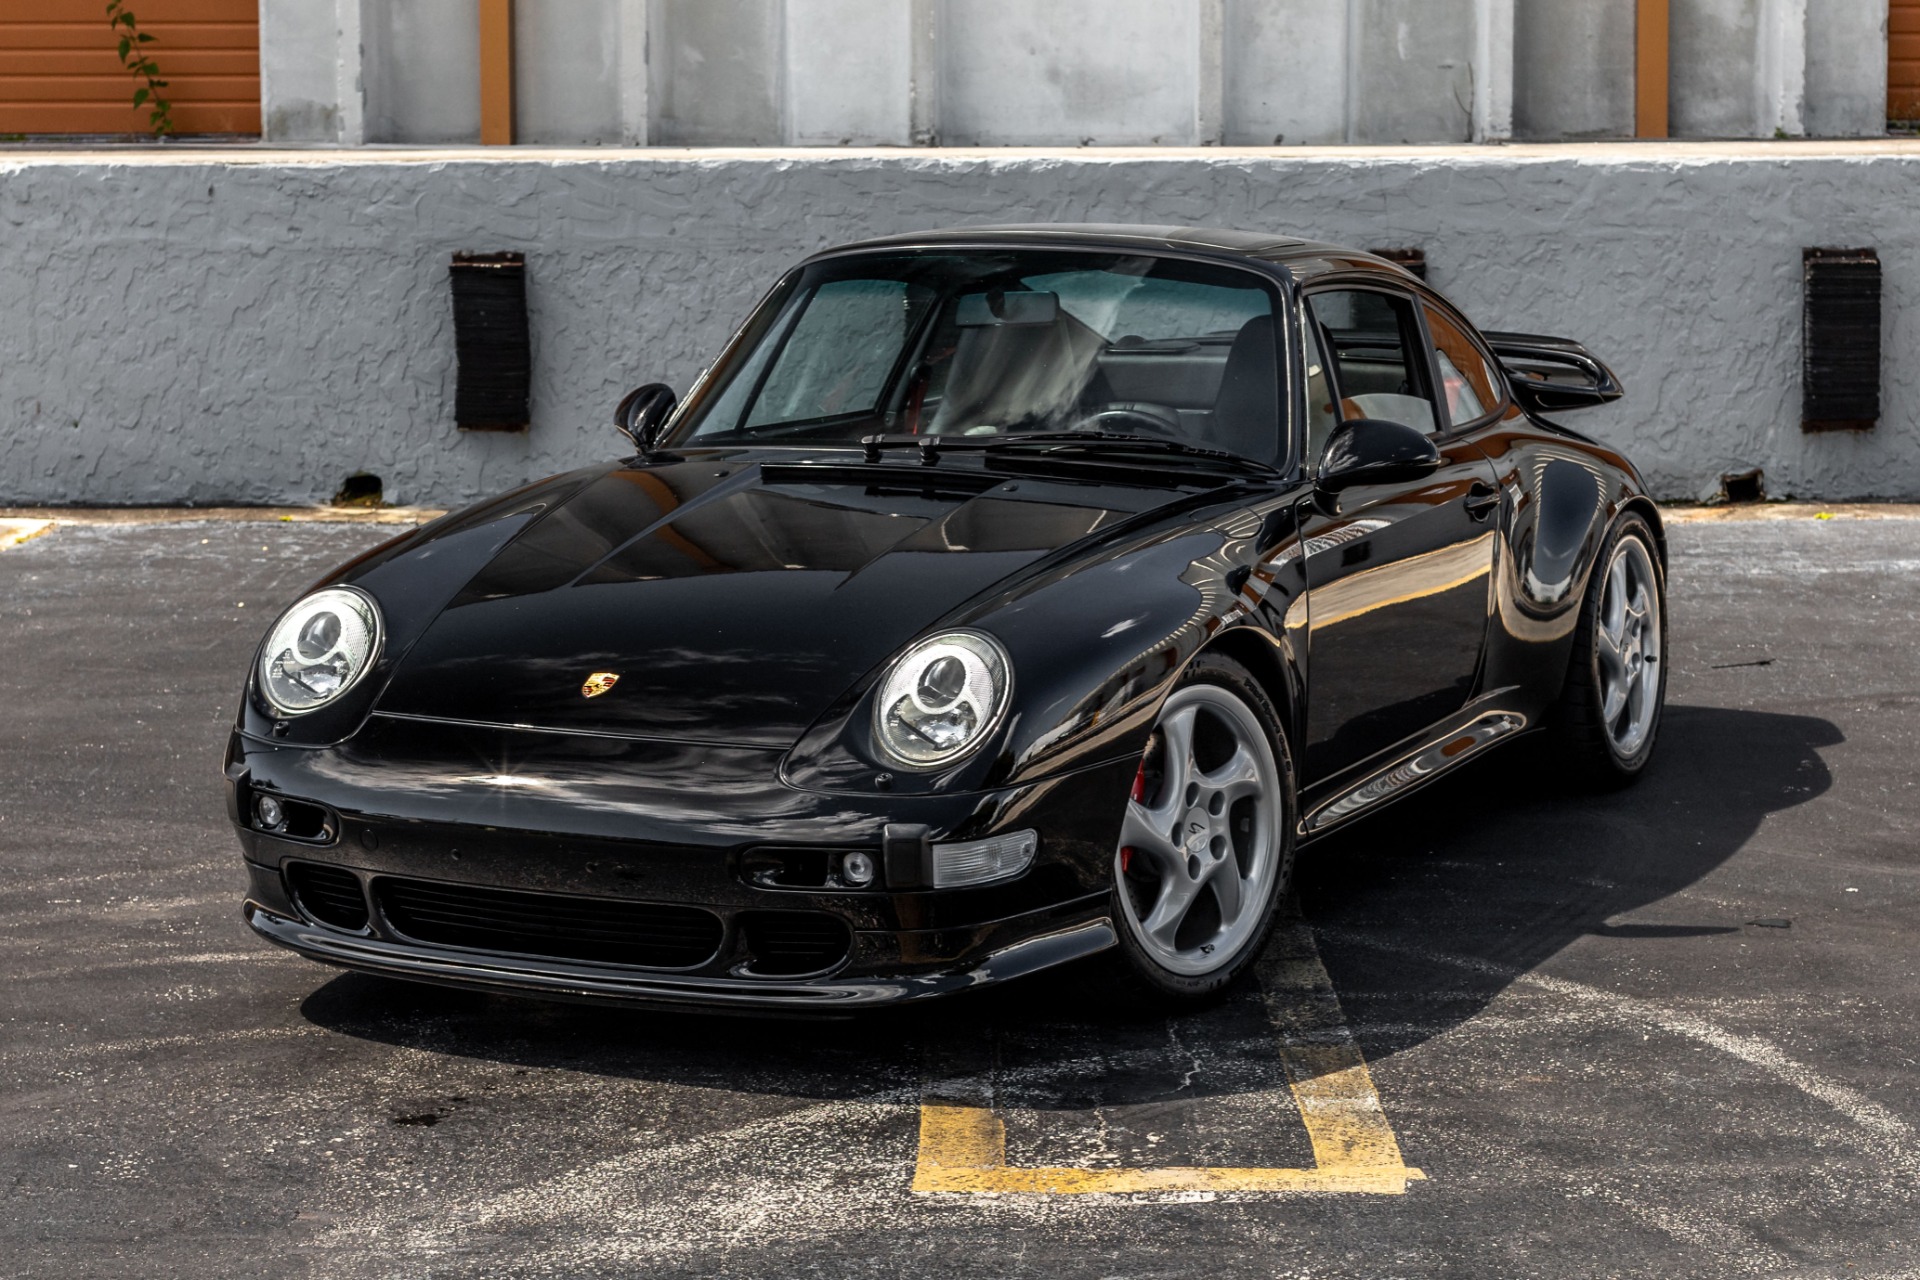 Used 1998 Porsche 911 Carrera 4S with Fister Exhaust, Factory Aero Kit,  PSS9 Coilovers, Spacers For Sale (Sold) | Exotics Hunter Stock #22067